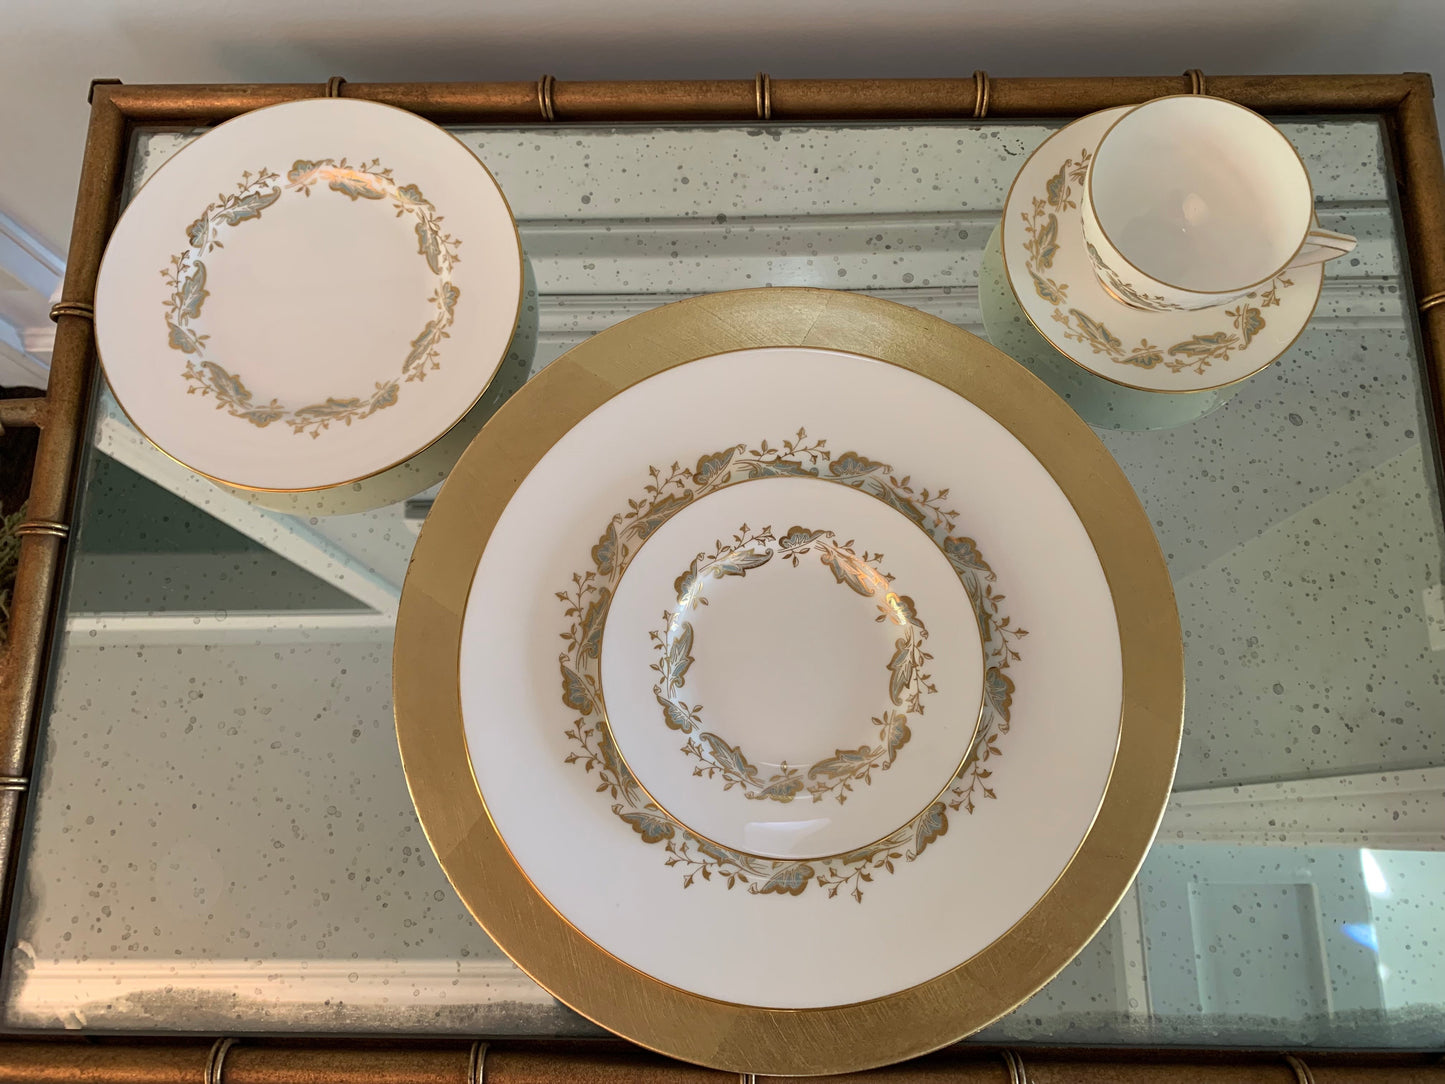 Set (35 pieces) of Minton Corinthian Bone China Made in England - Excellent!